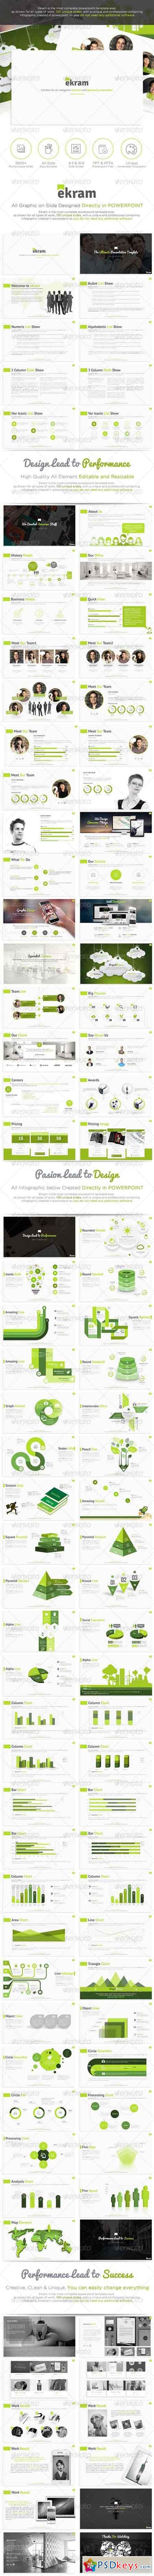 Ekram - The Most Complete PowerPoint Template 8054681